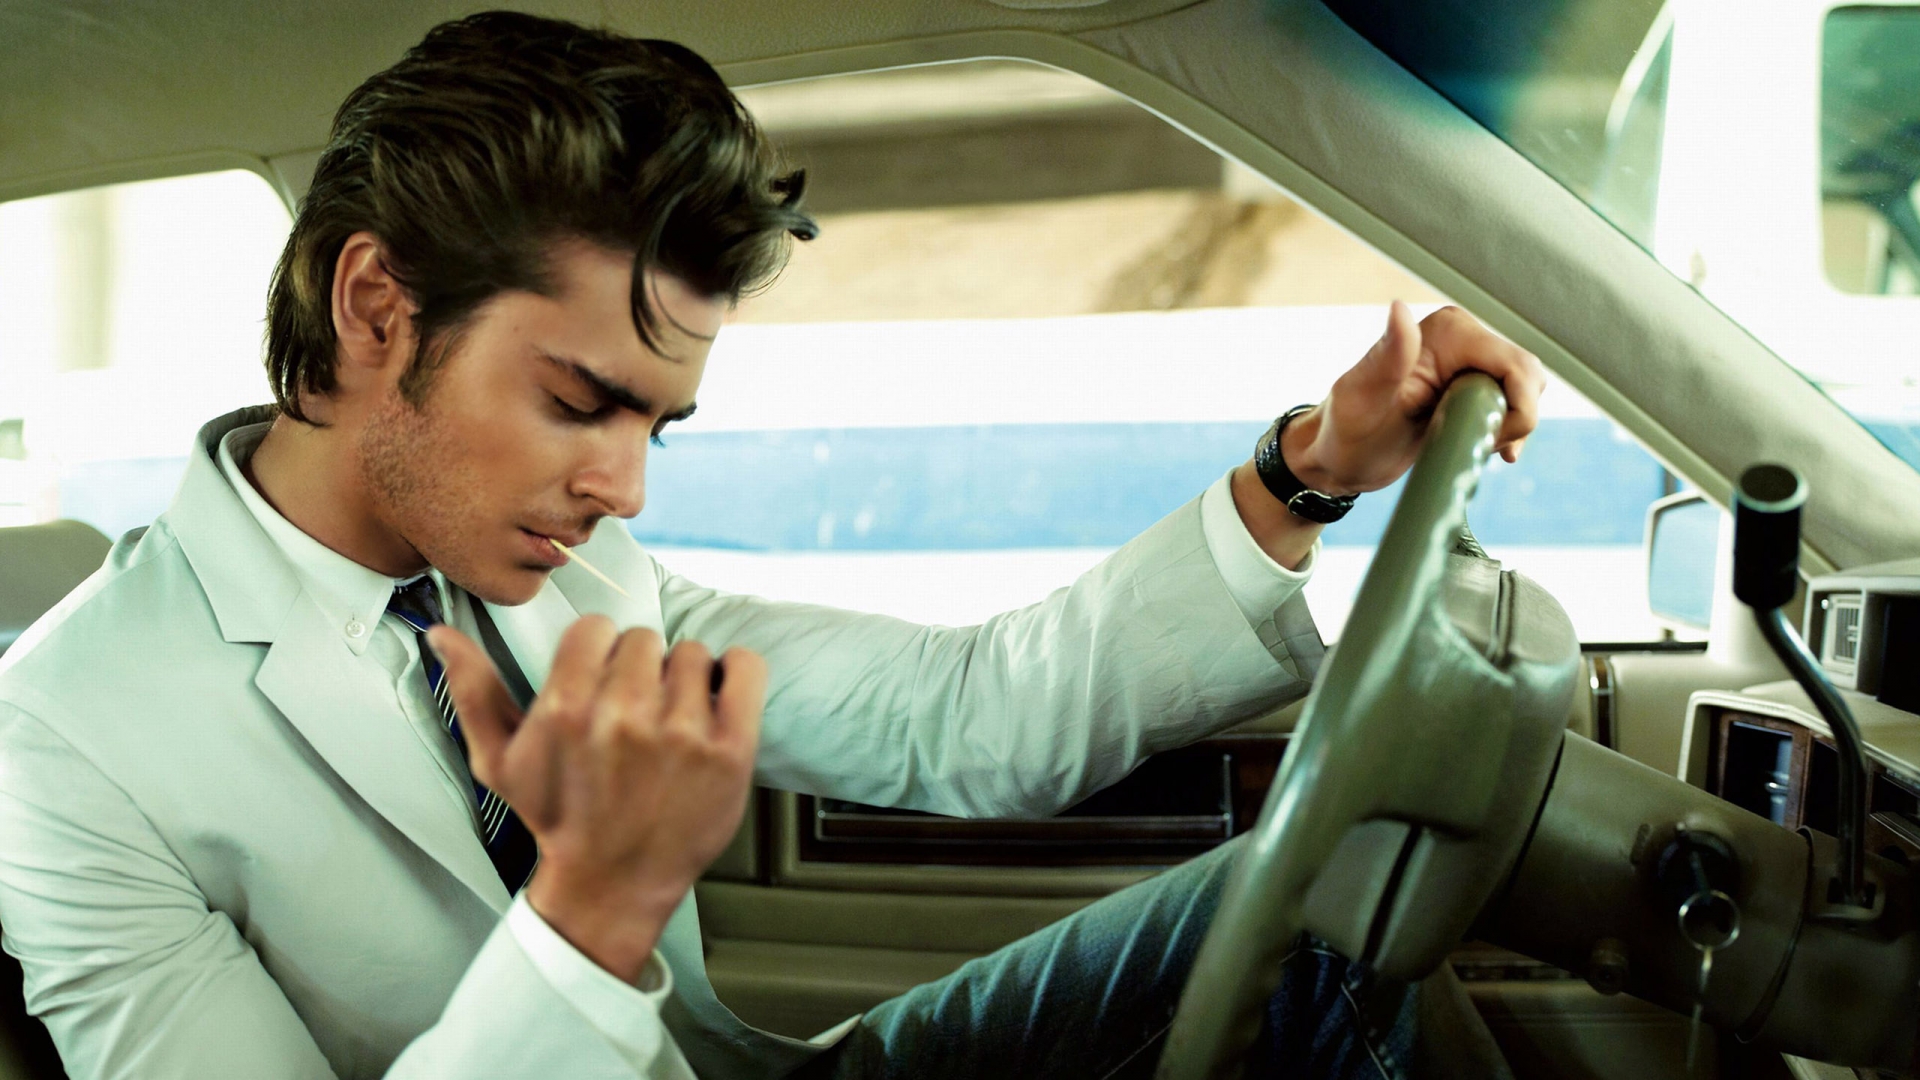 Zac Efron Rock and Roll Style for 1920 x 1080 HDTV 1080p resolution